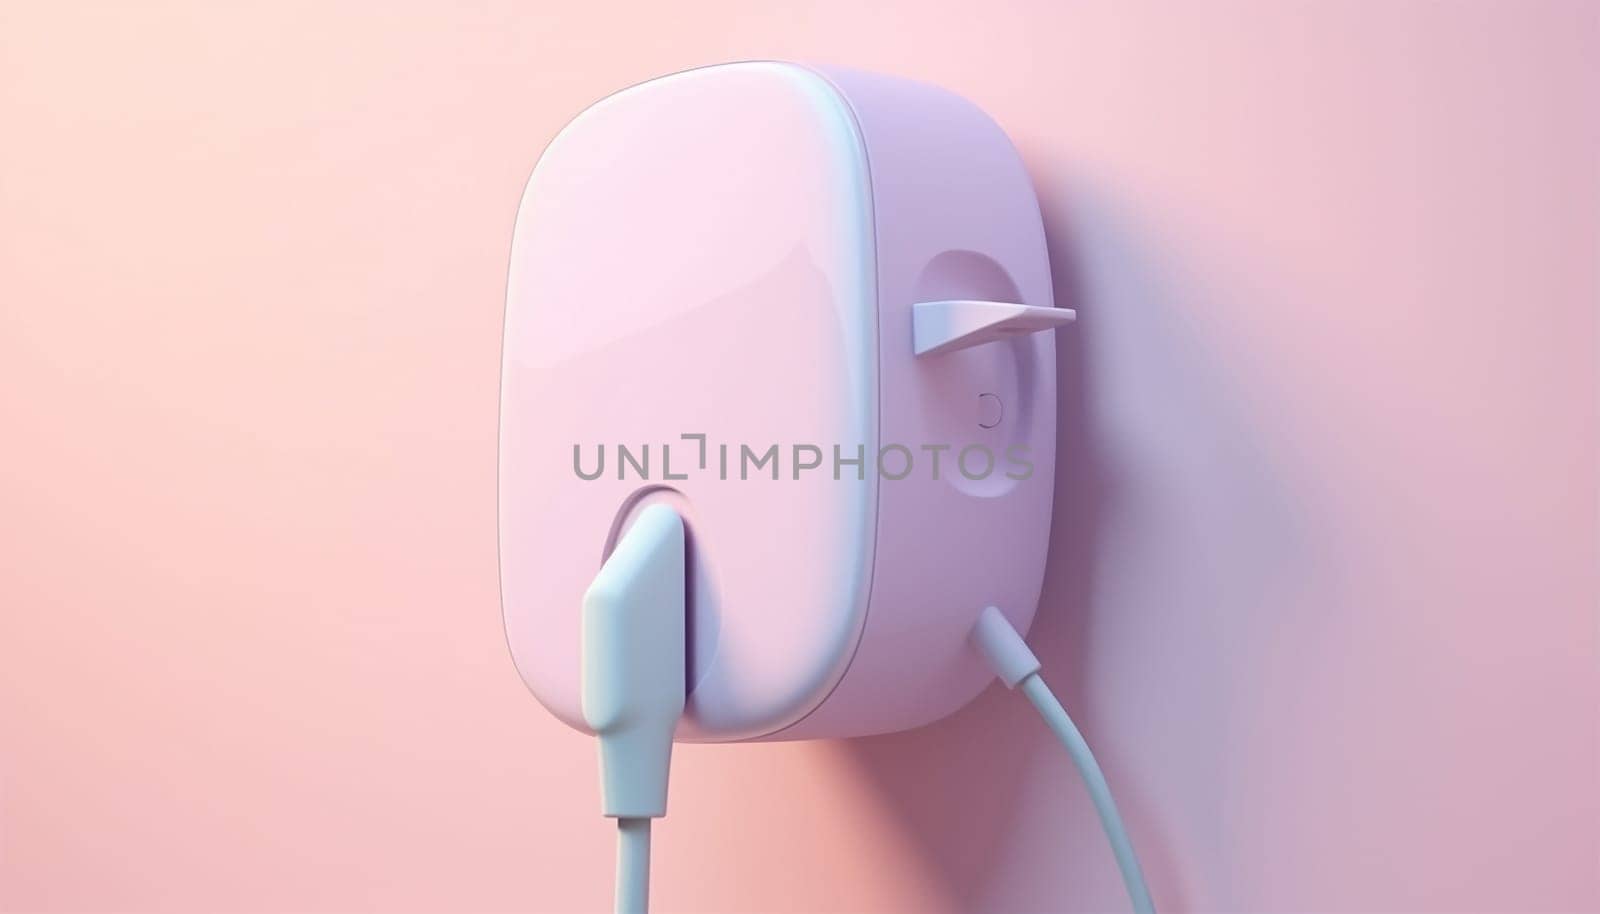 Electric car 3D charging background. Electronic vehicle power dock. EV Plugin station. Fuel recharge cells. pastel colored illustration. Power supply for electric car charging. Electric car charging station. Power supply plugged into an electric car being charged concept Copy space